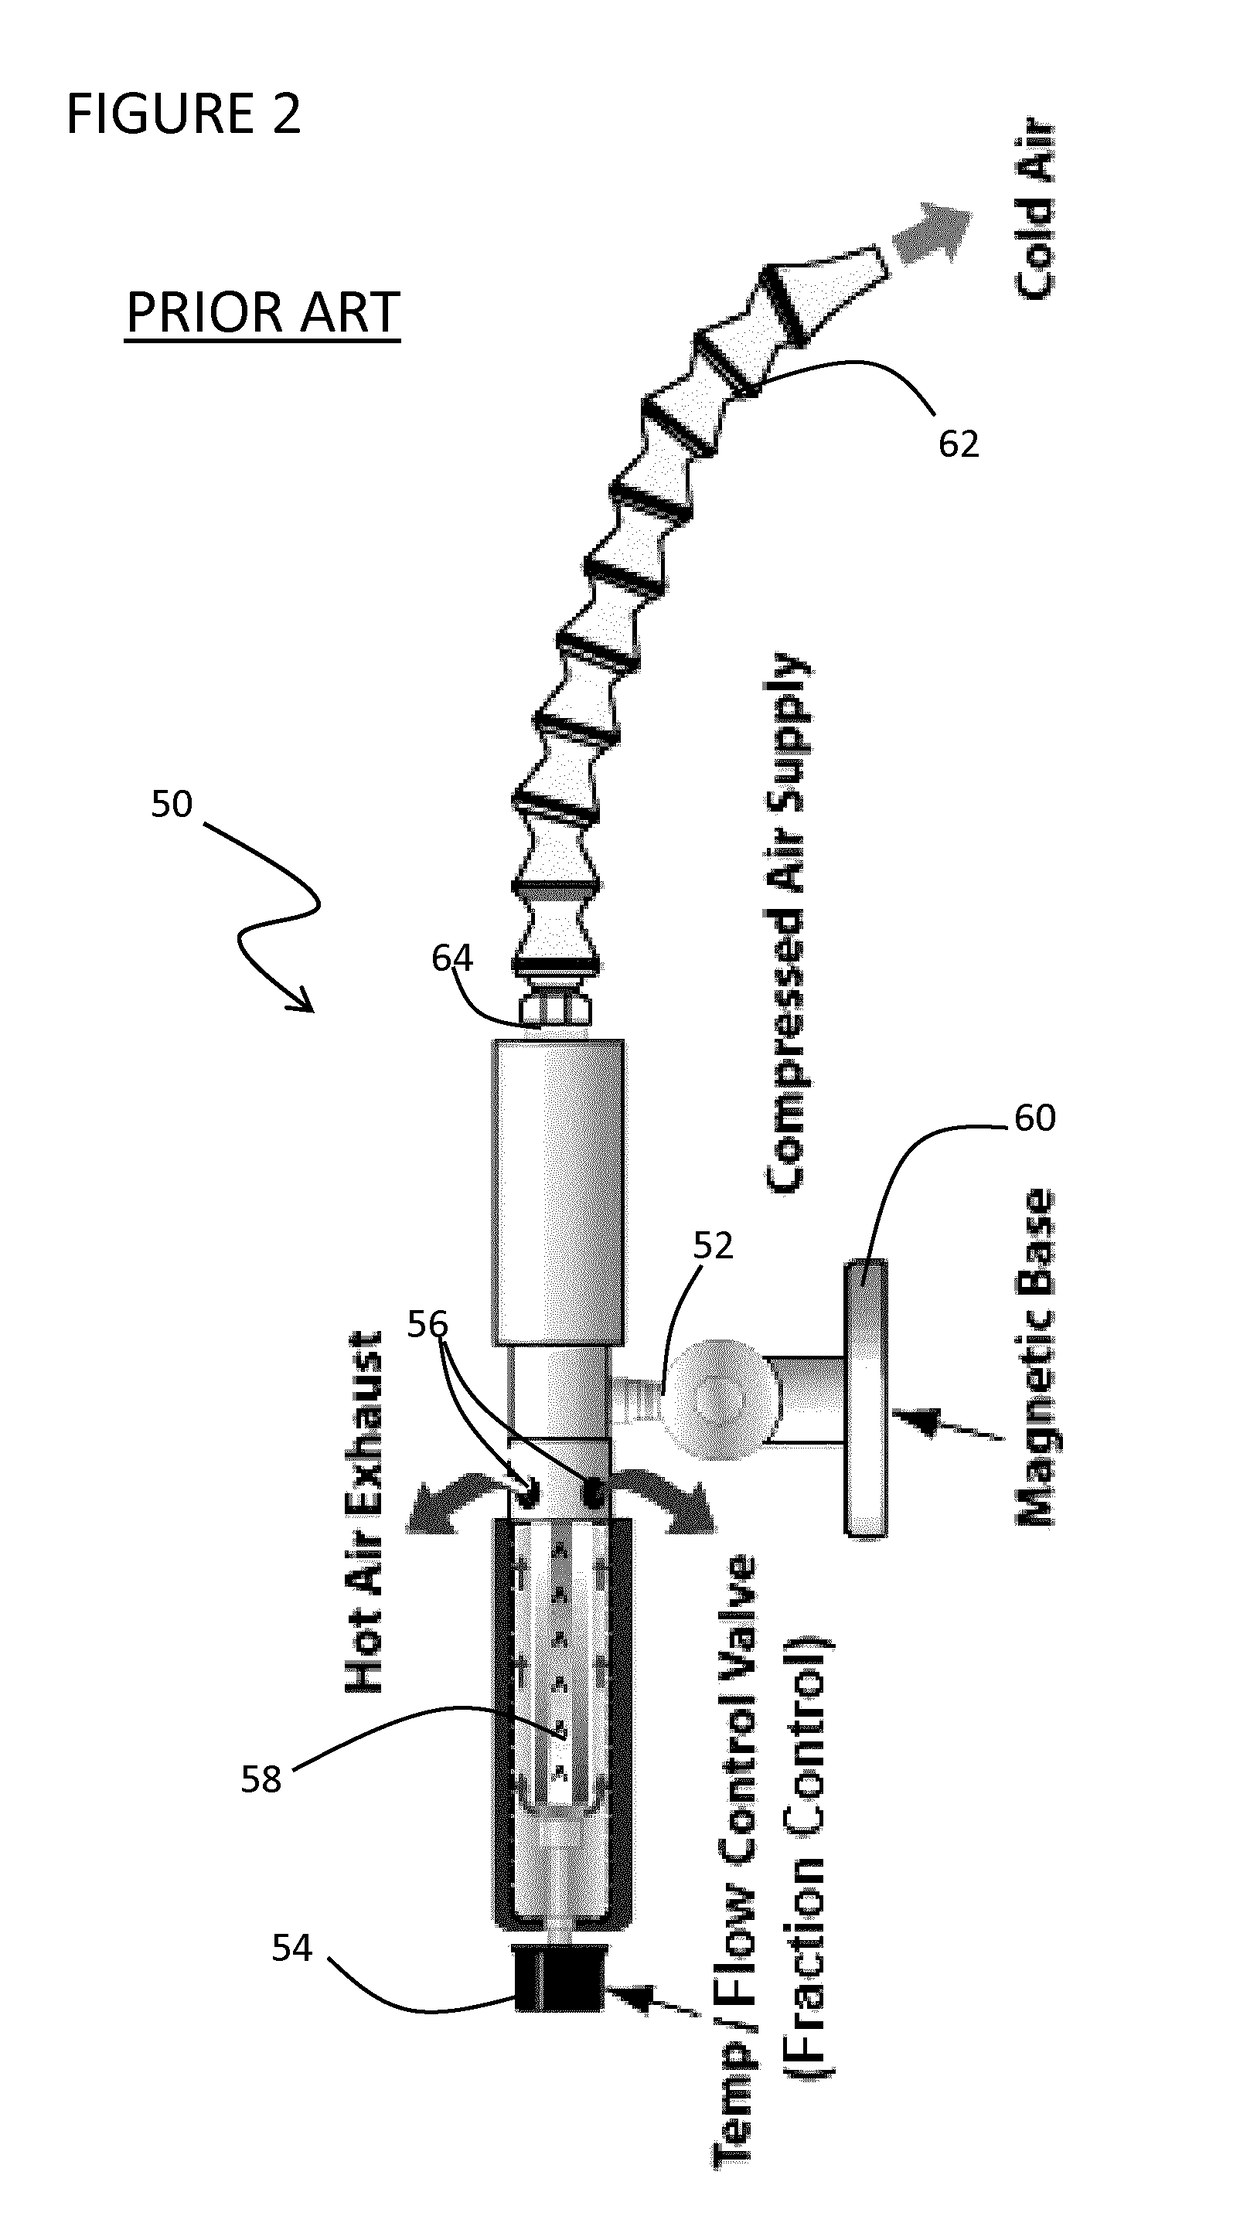 Mammalian head cooling system and method